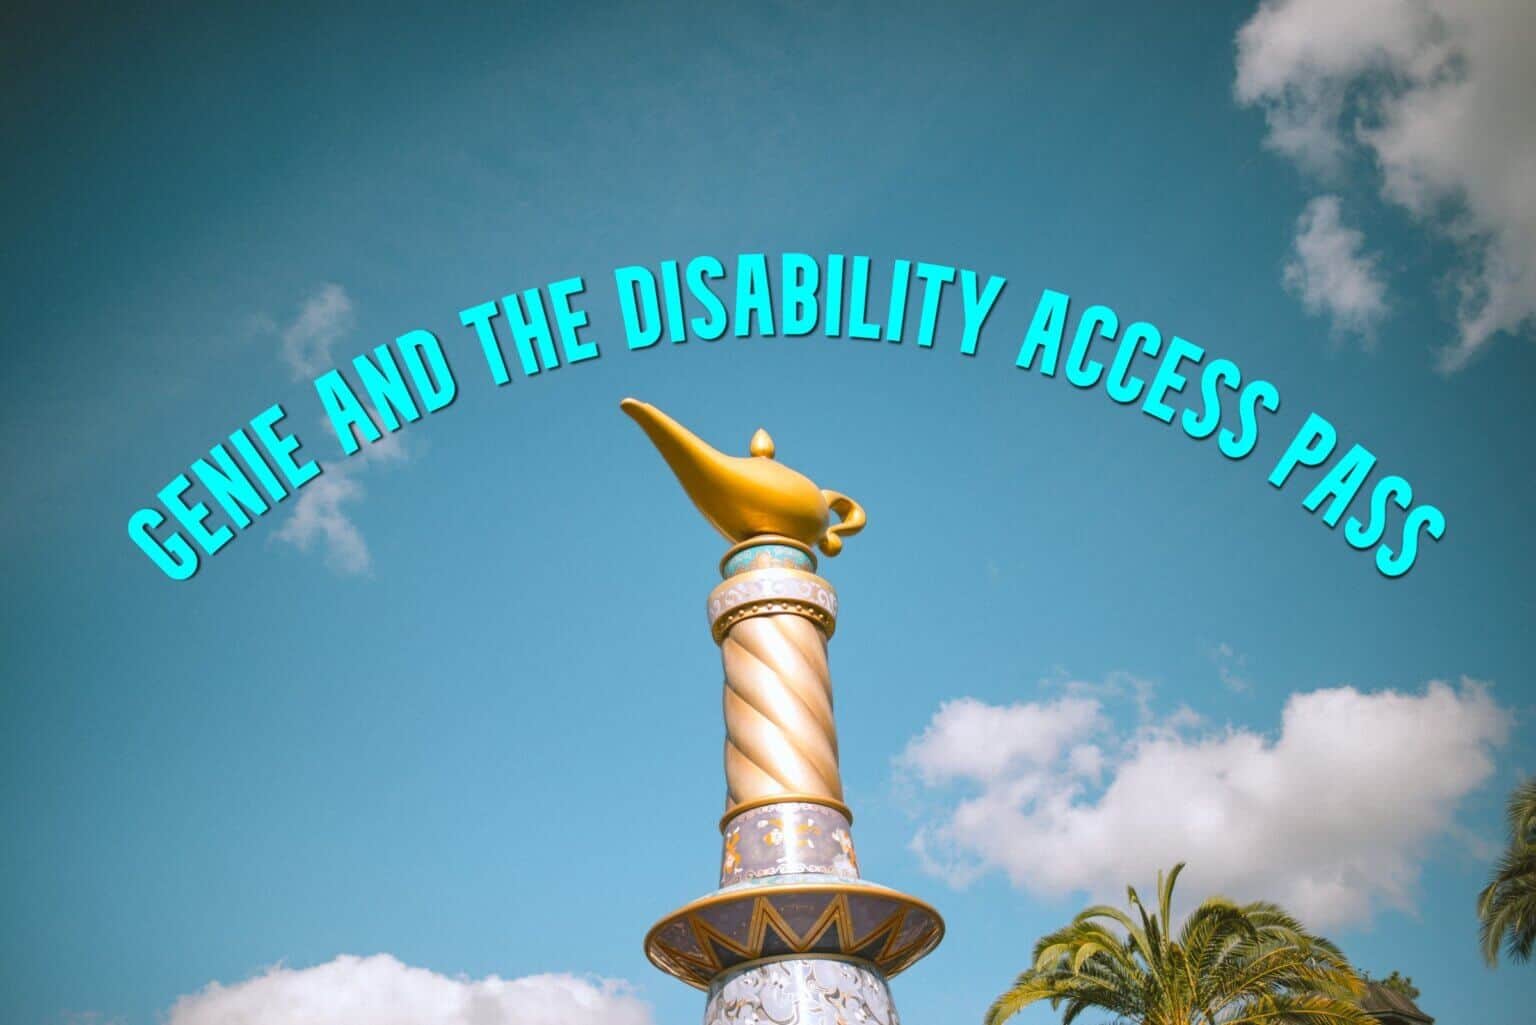 Disability Access Pass guide